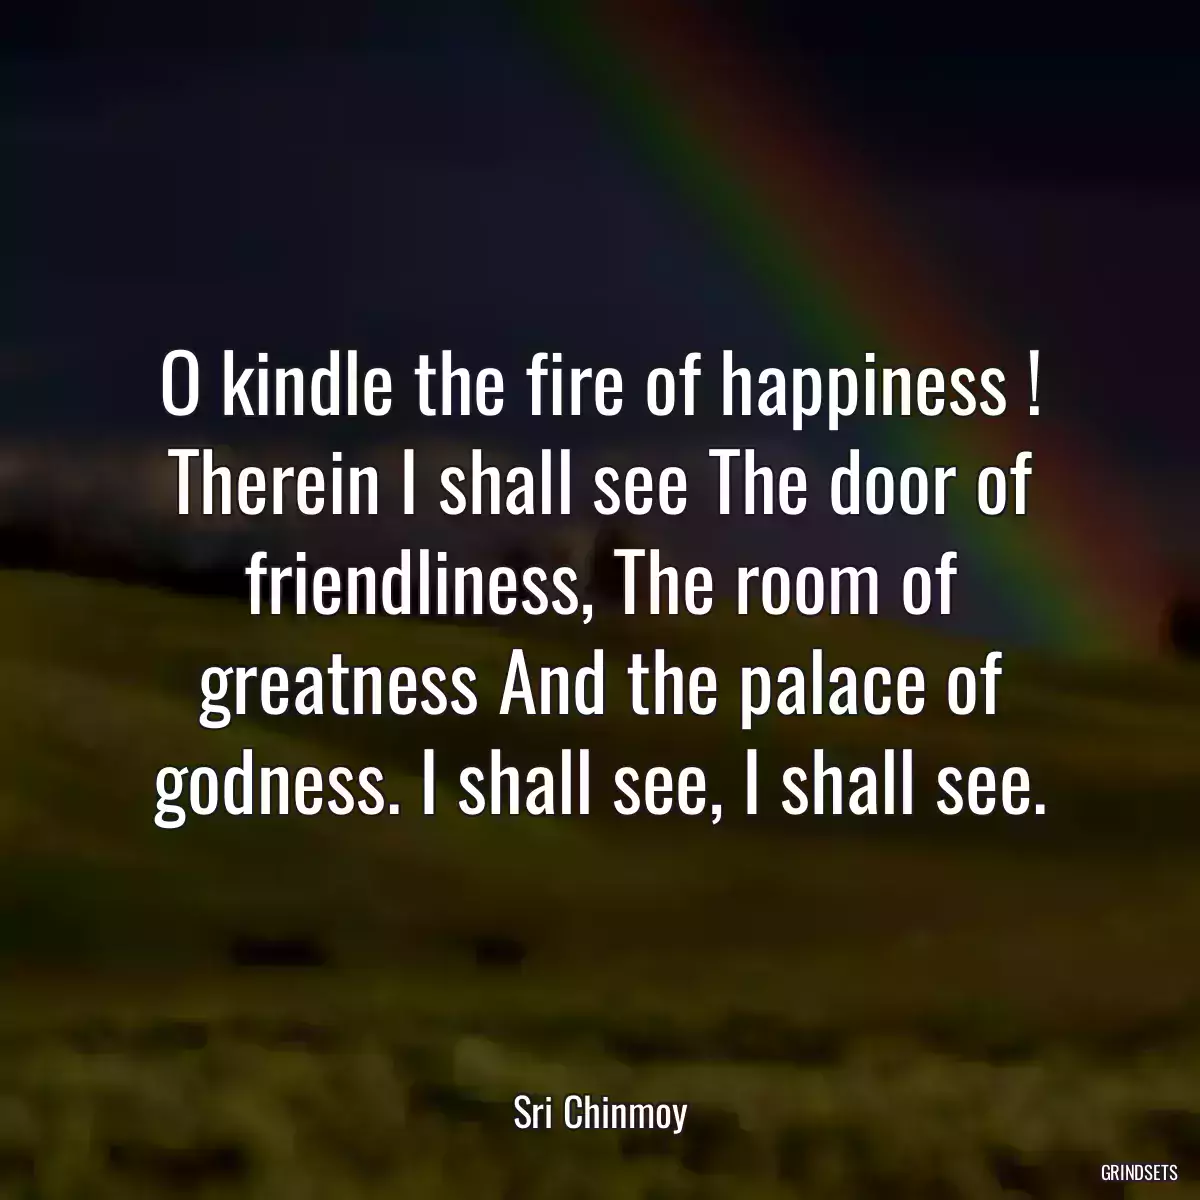 O kindle the fire of happiness ! Therein I shall see The door of friendliness, The room of greatness And the palace of godness. I shall see, I shall see.